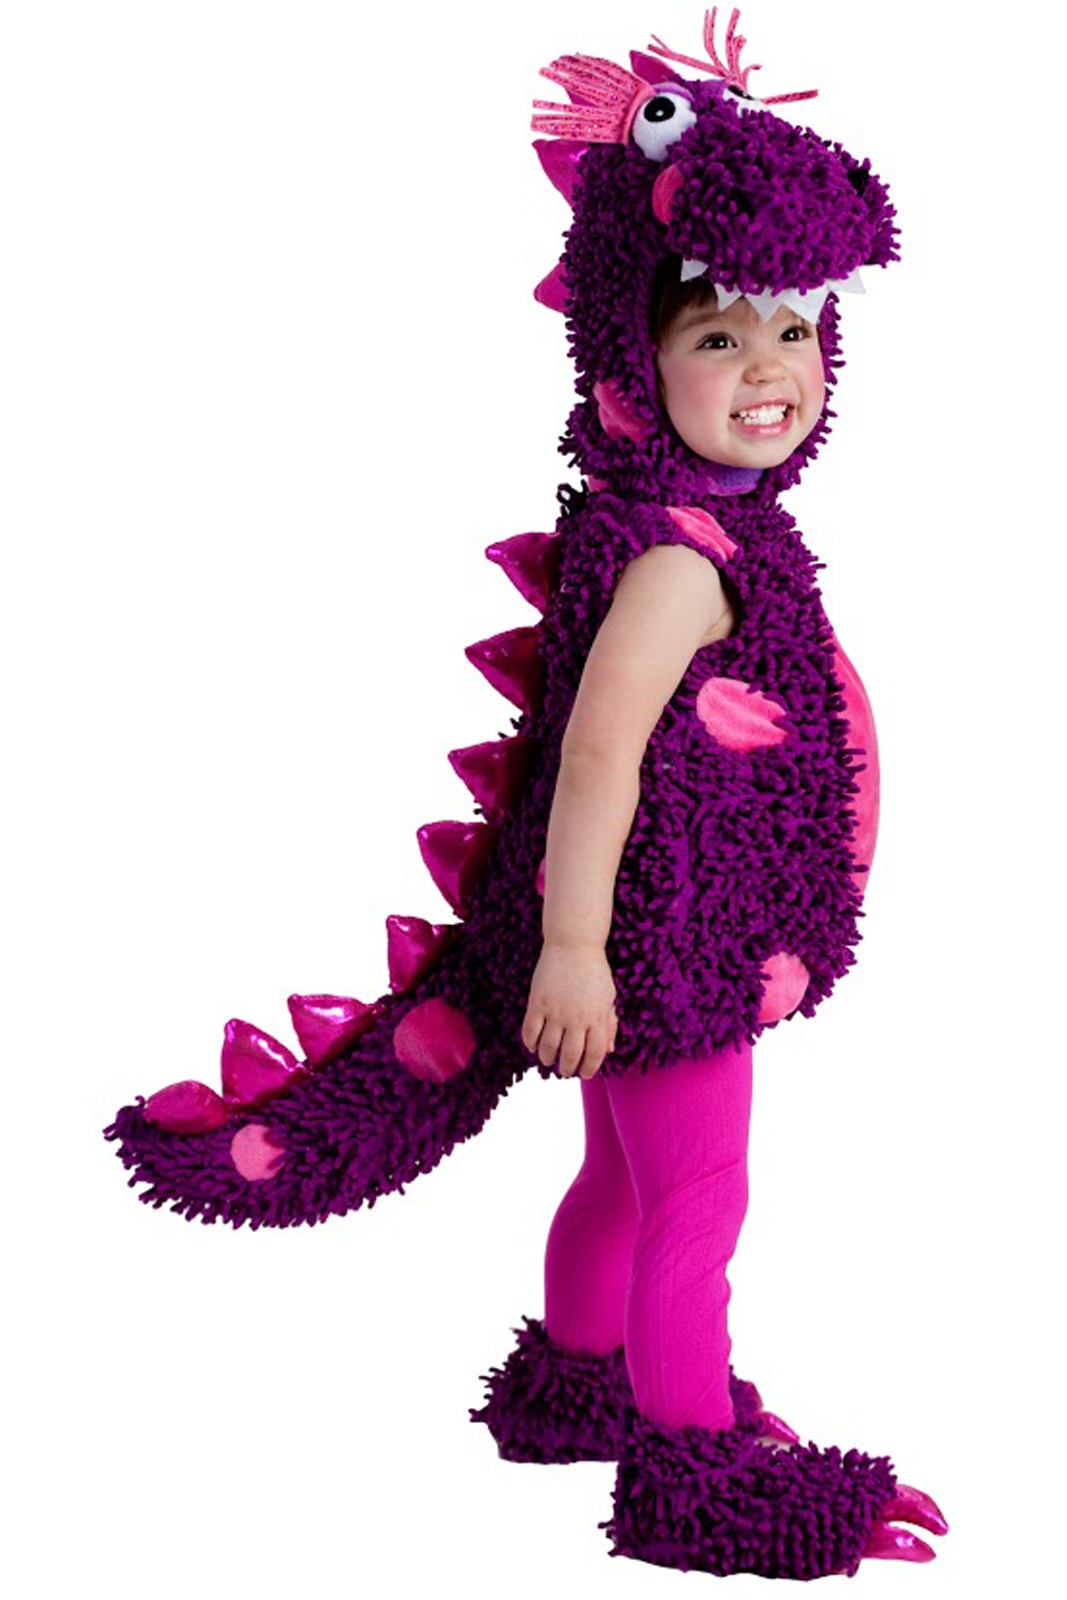 Paige the Dragon Toddler Costume